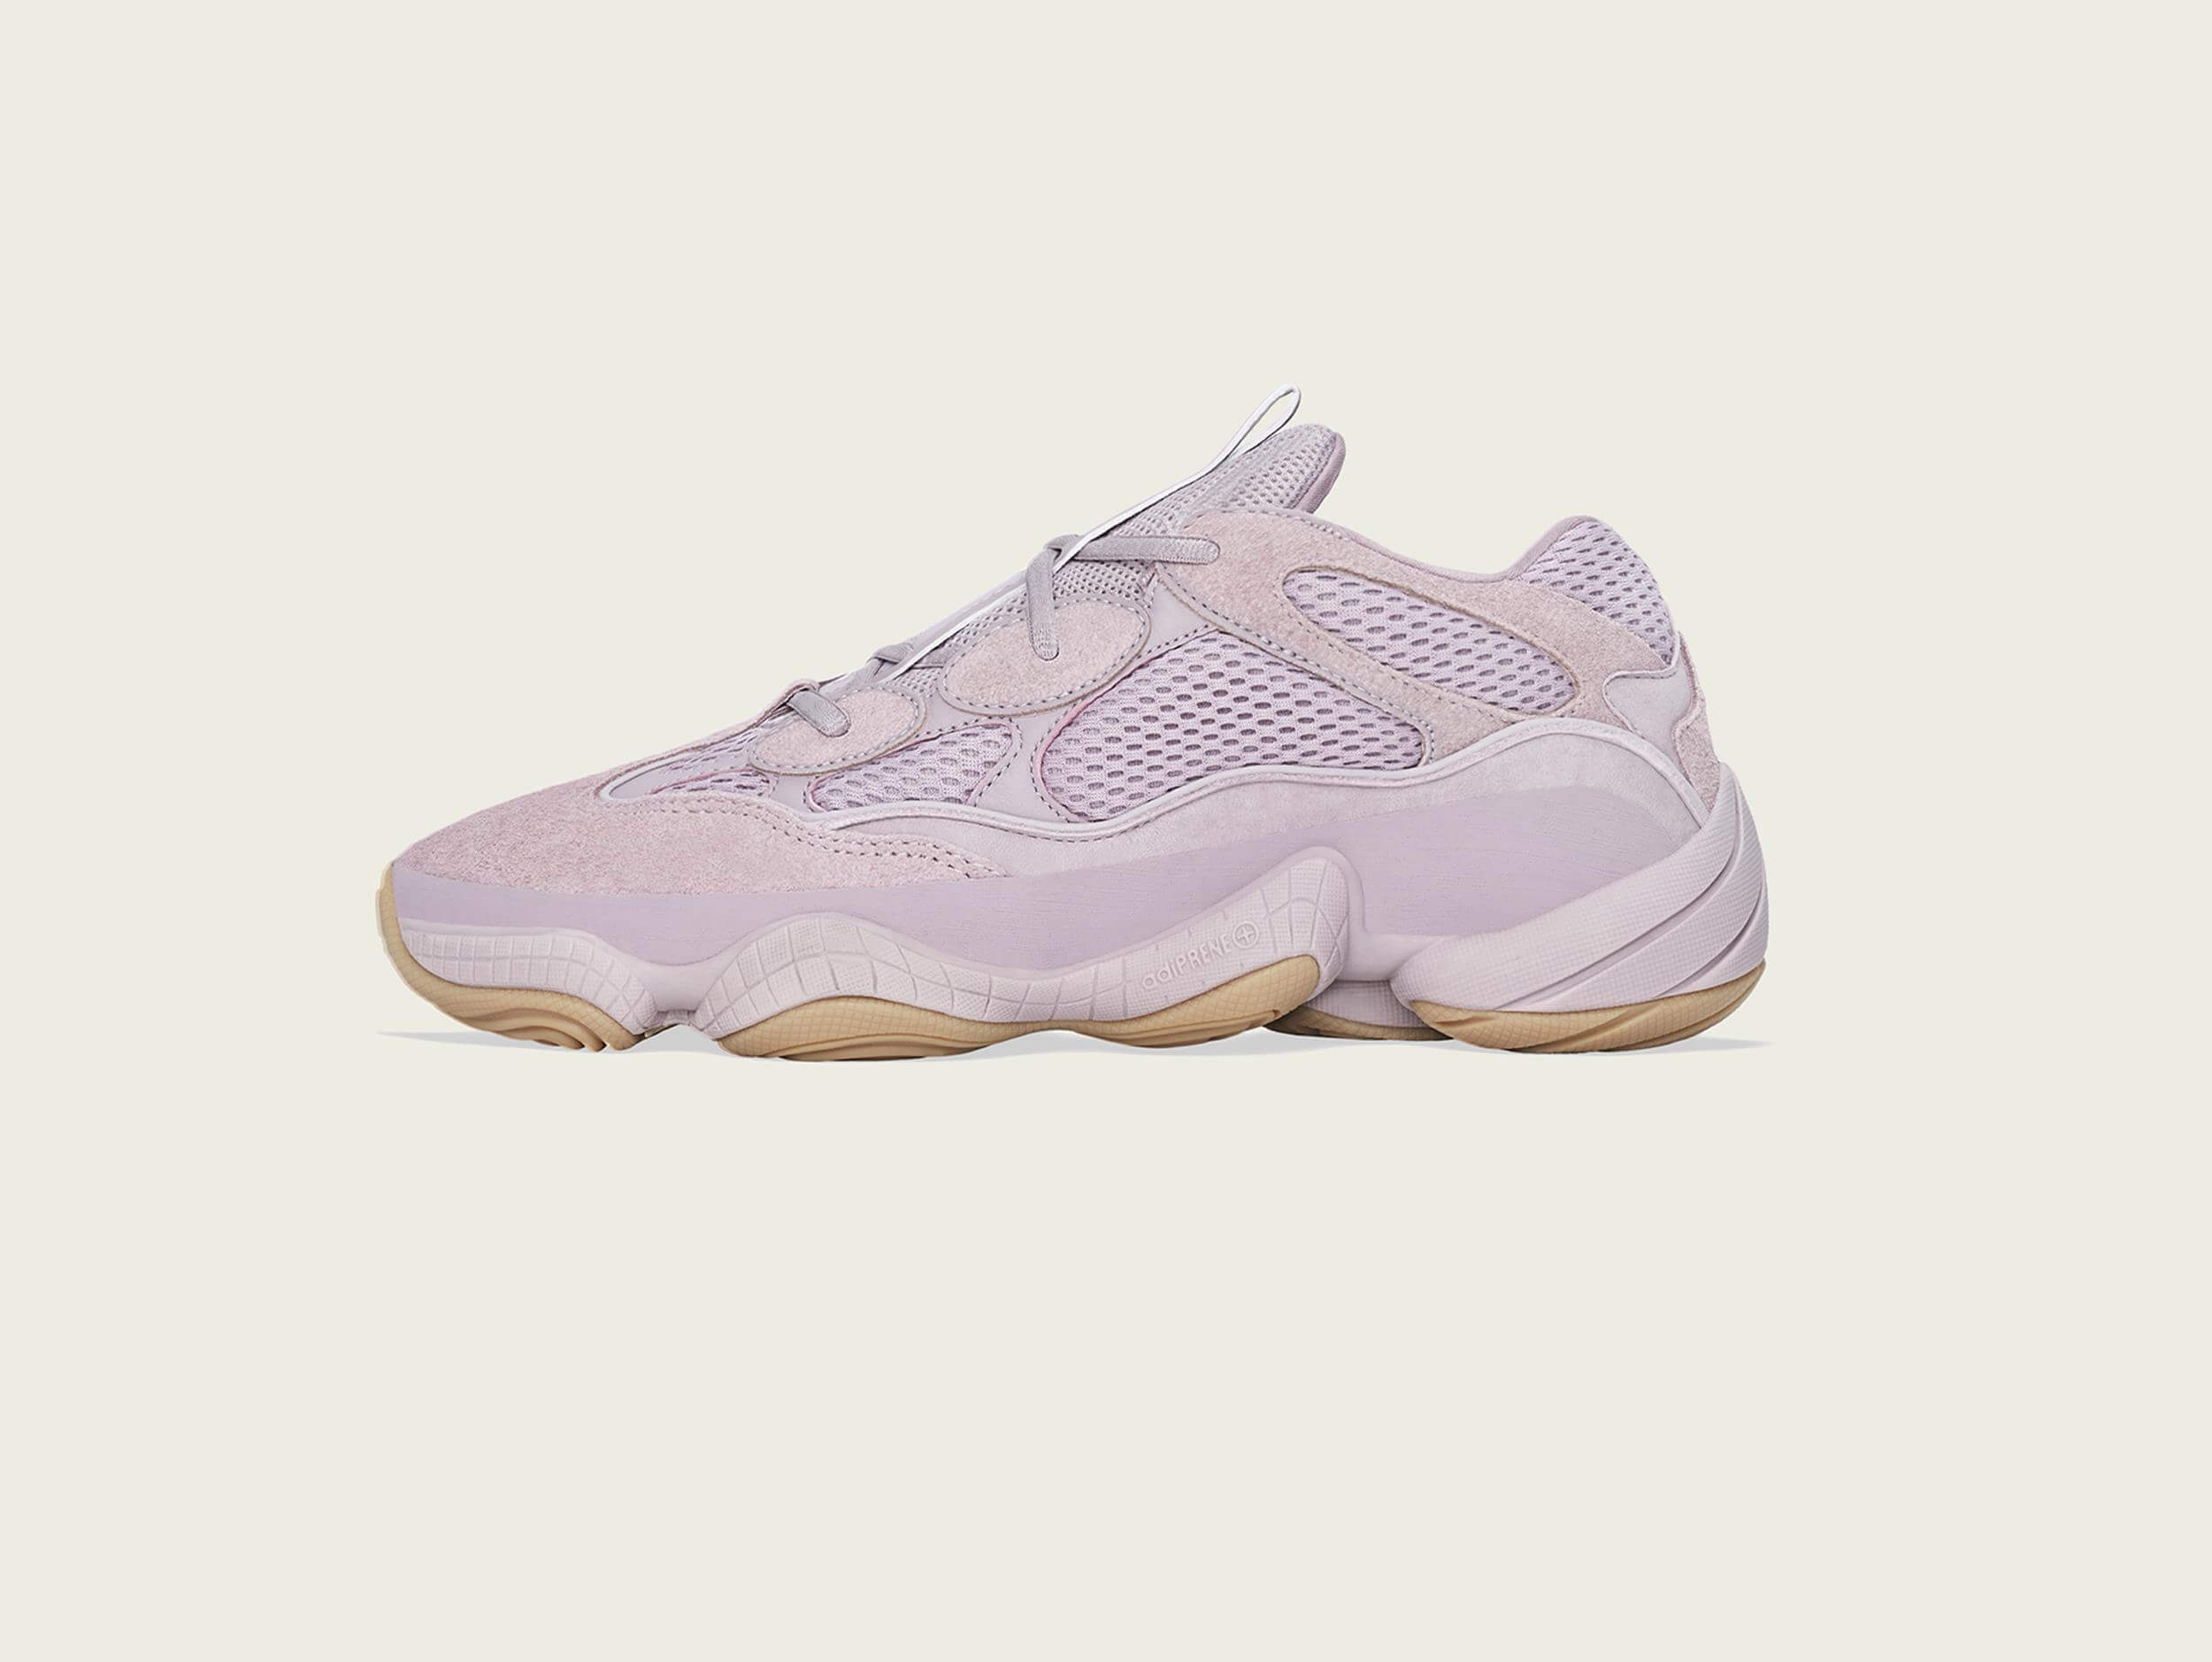 Yeezy 500 ‘Soft Vision’ Pink